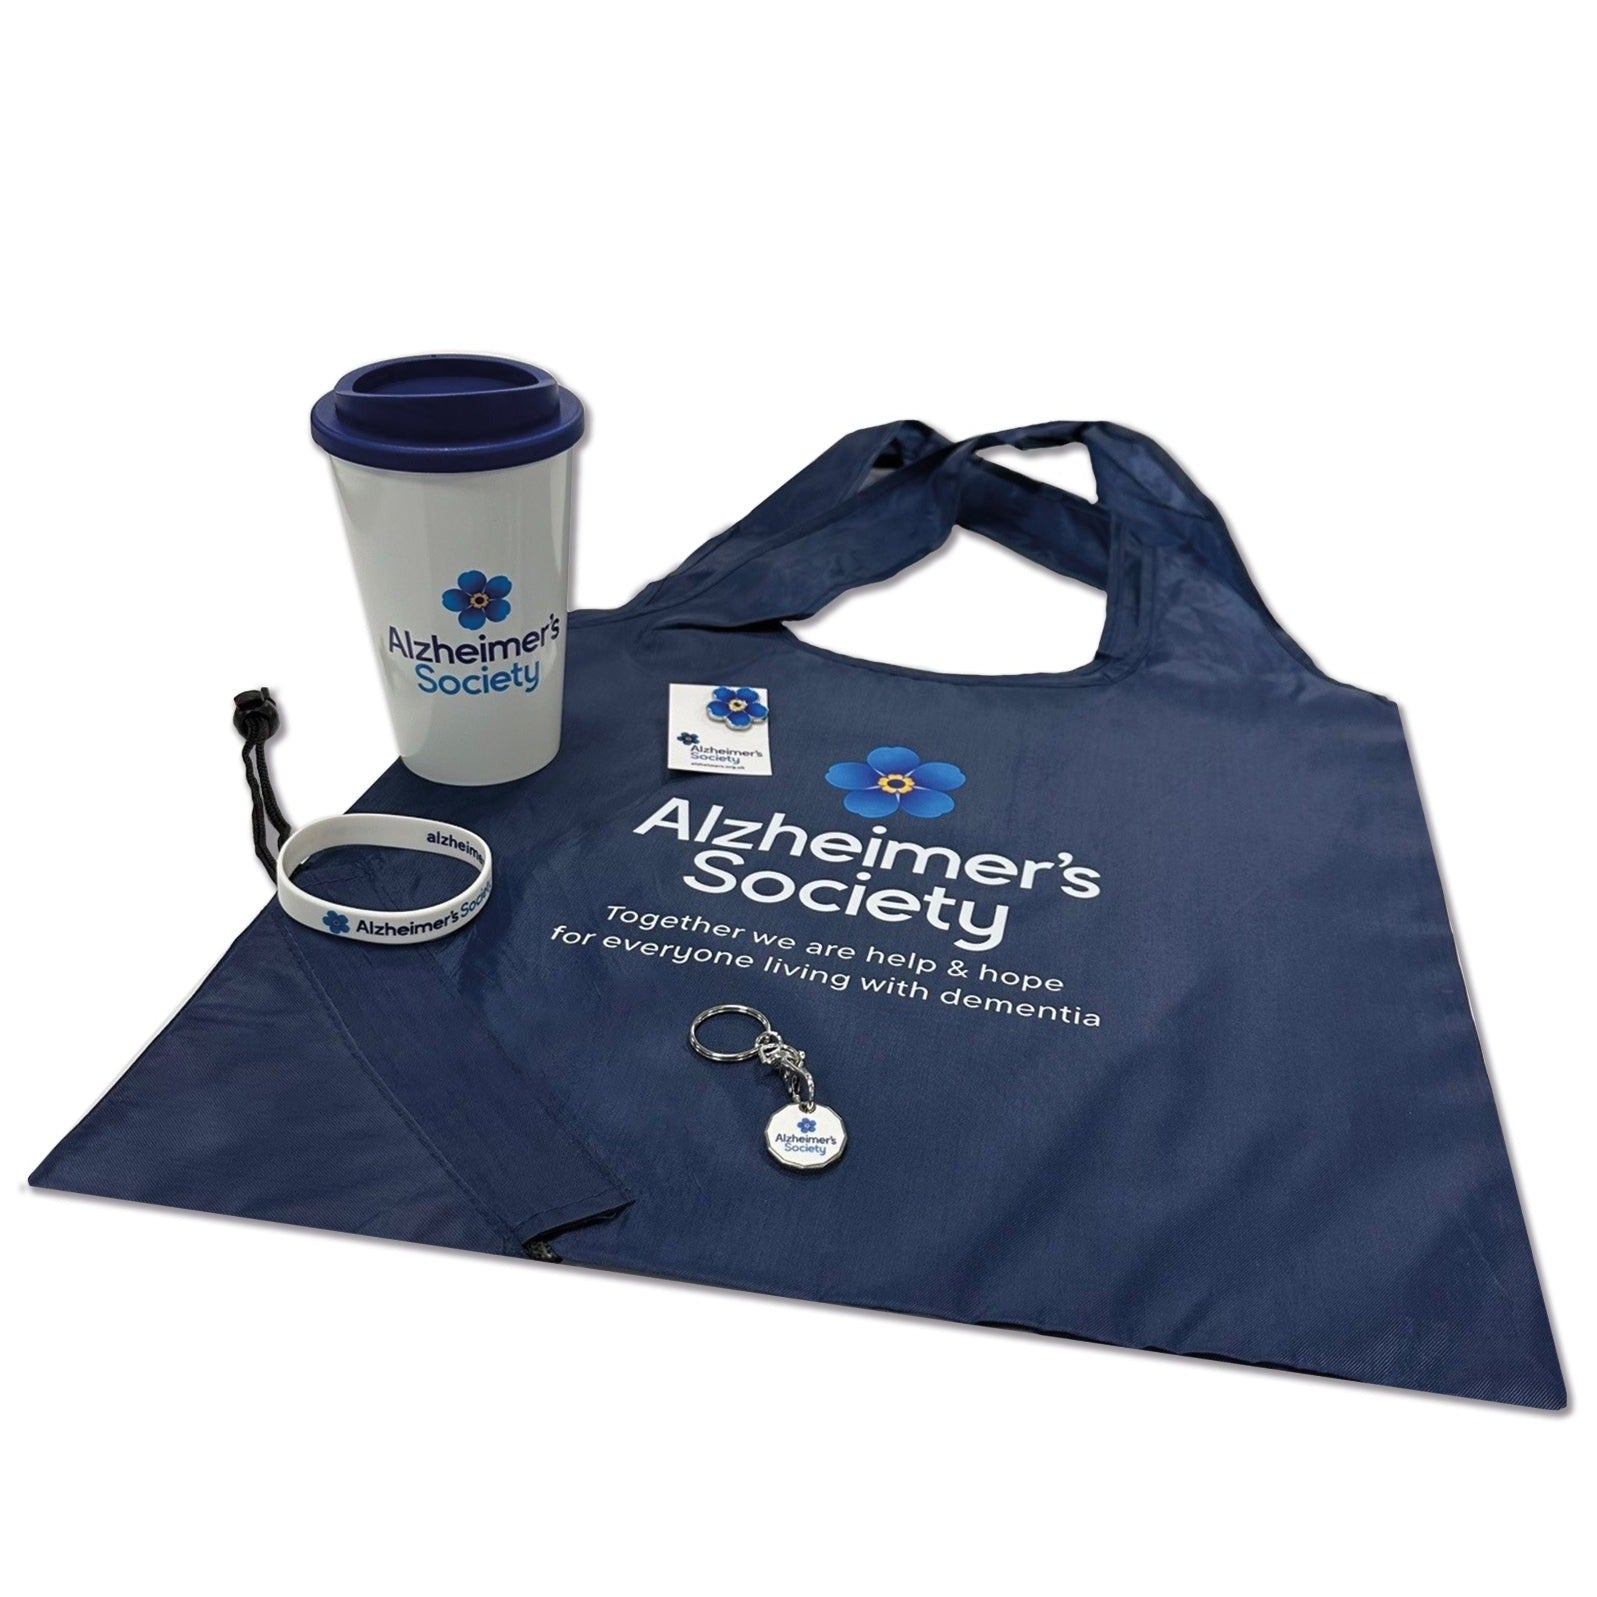 A bundle of Alzheimer's Society branded bestsellers which include a enamelled blue pin badge, white wristband, metal trolley token keyring, white travel cup with blue lid and a blue shopper which tucks into its own drawstring bag. All branded with the Alzheimer's forget-me-not logo and charity name.